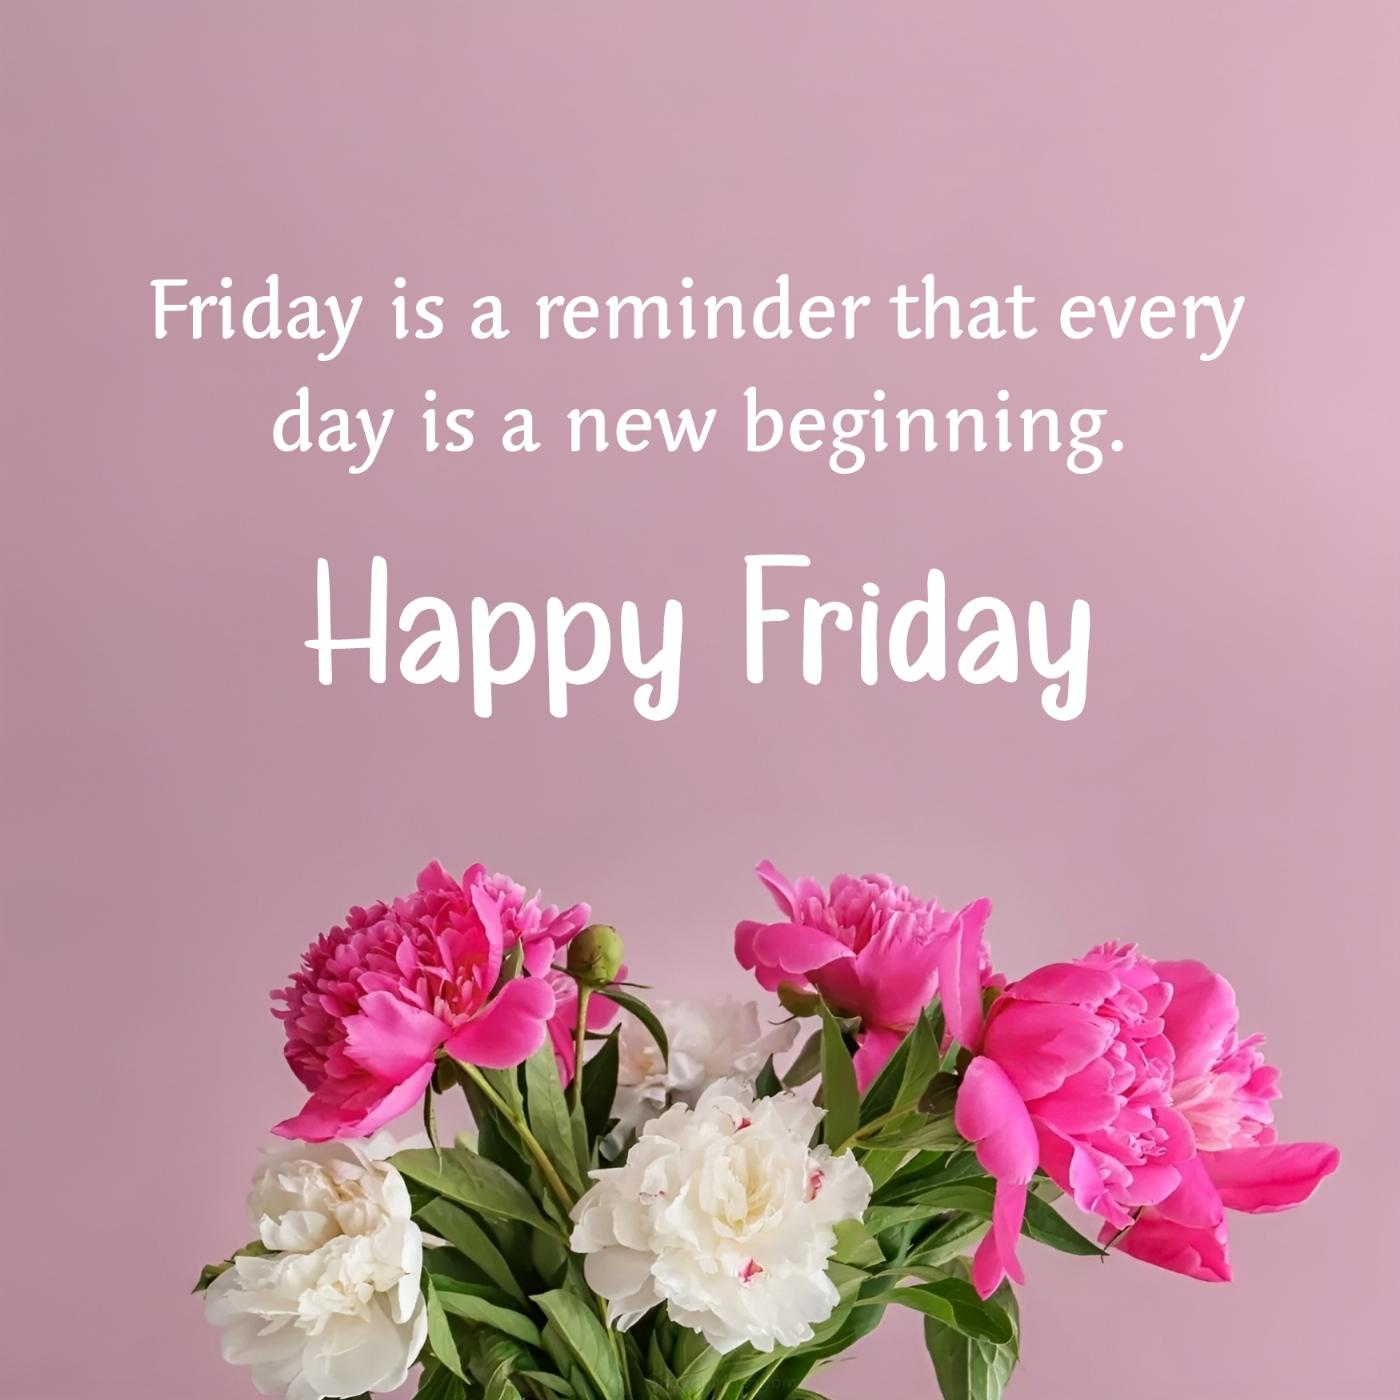 Friday is a reminder that every day is a new beginning